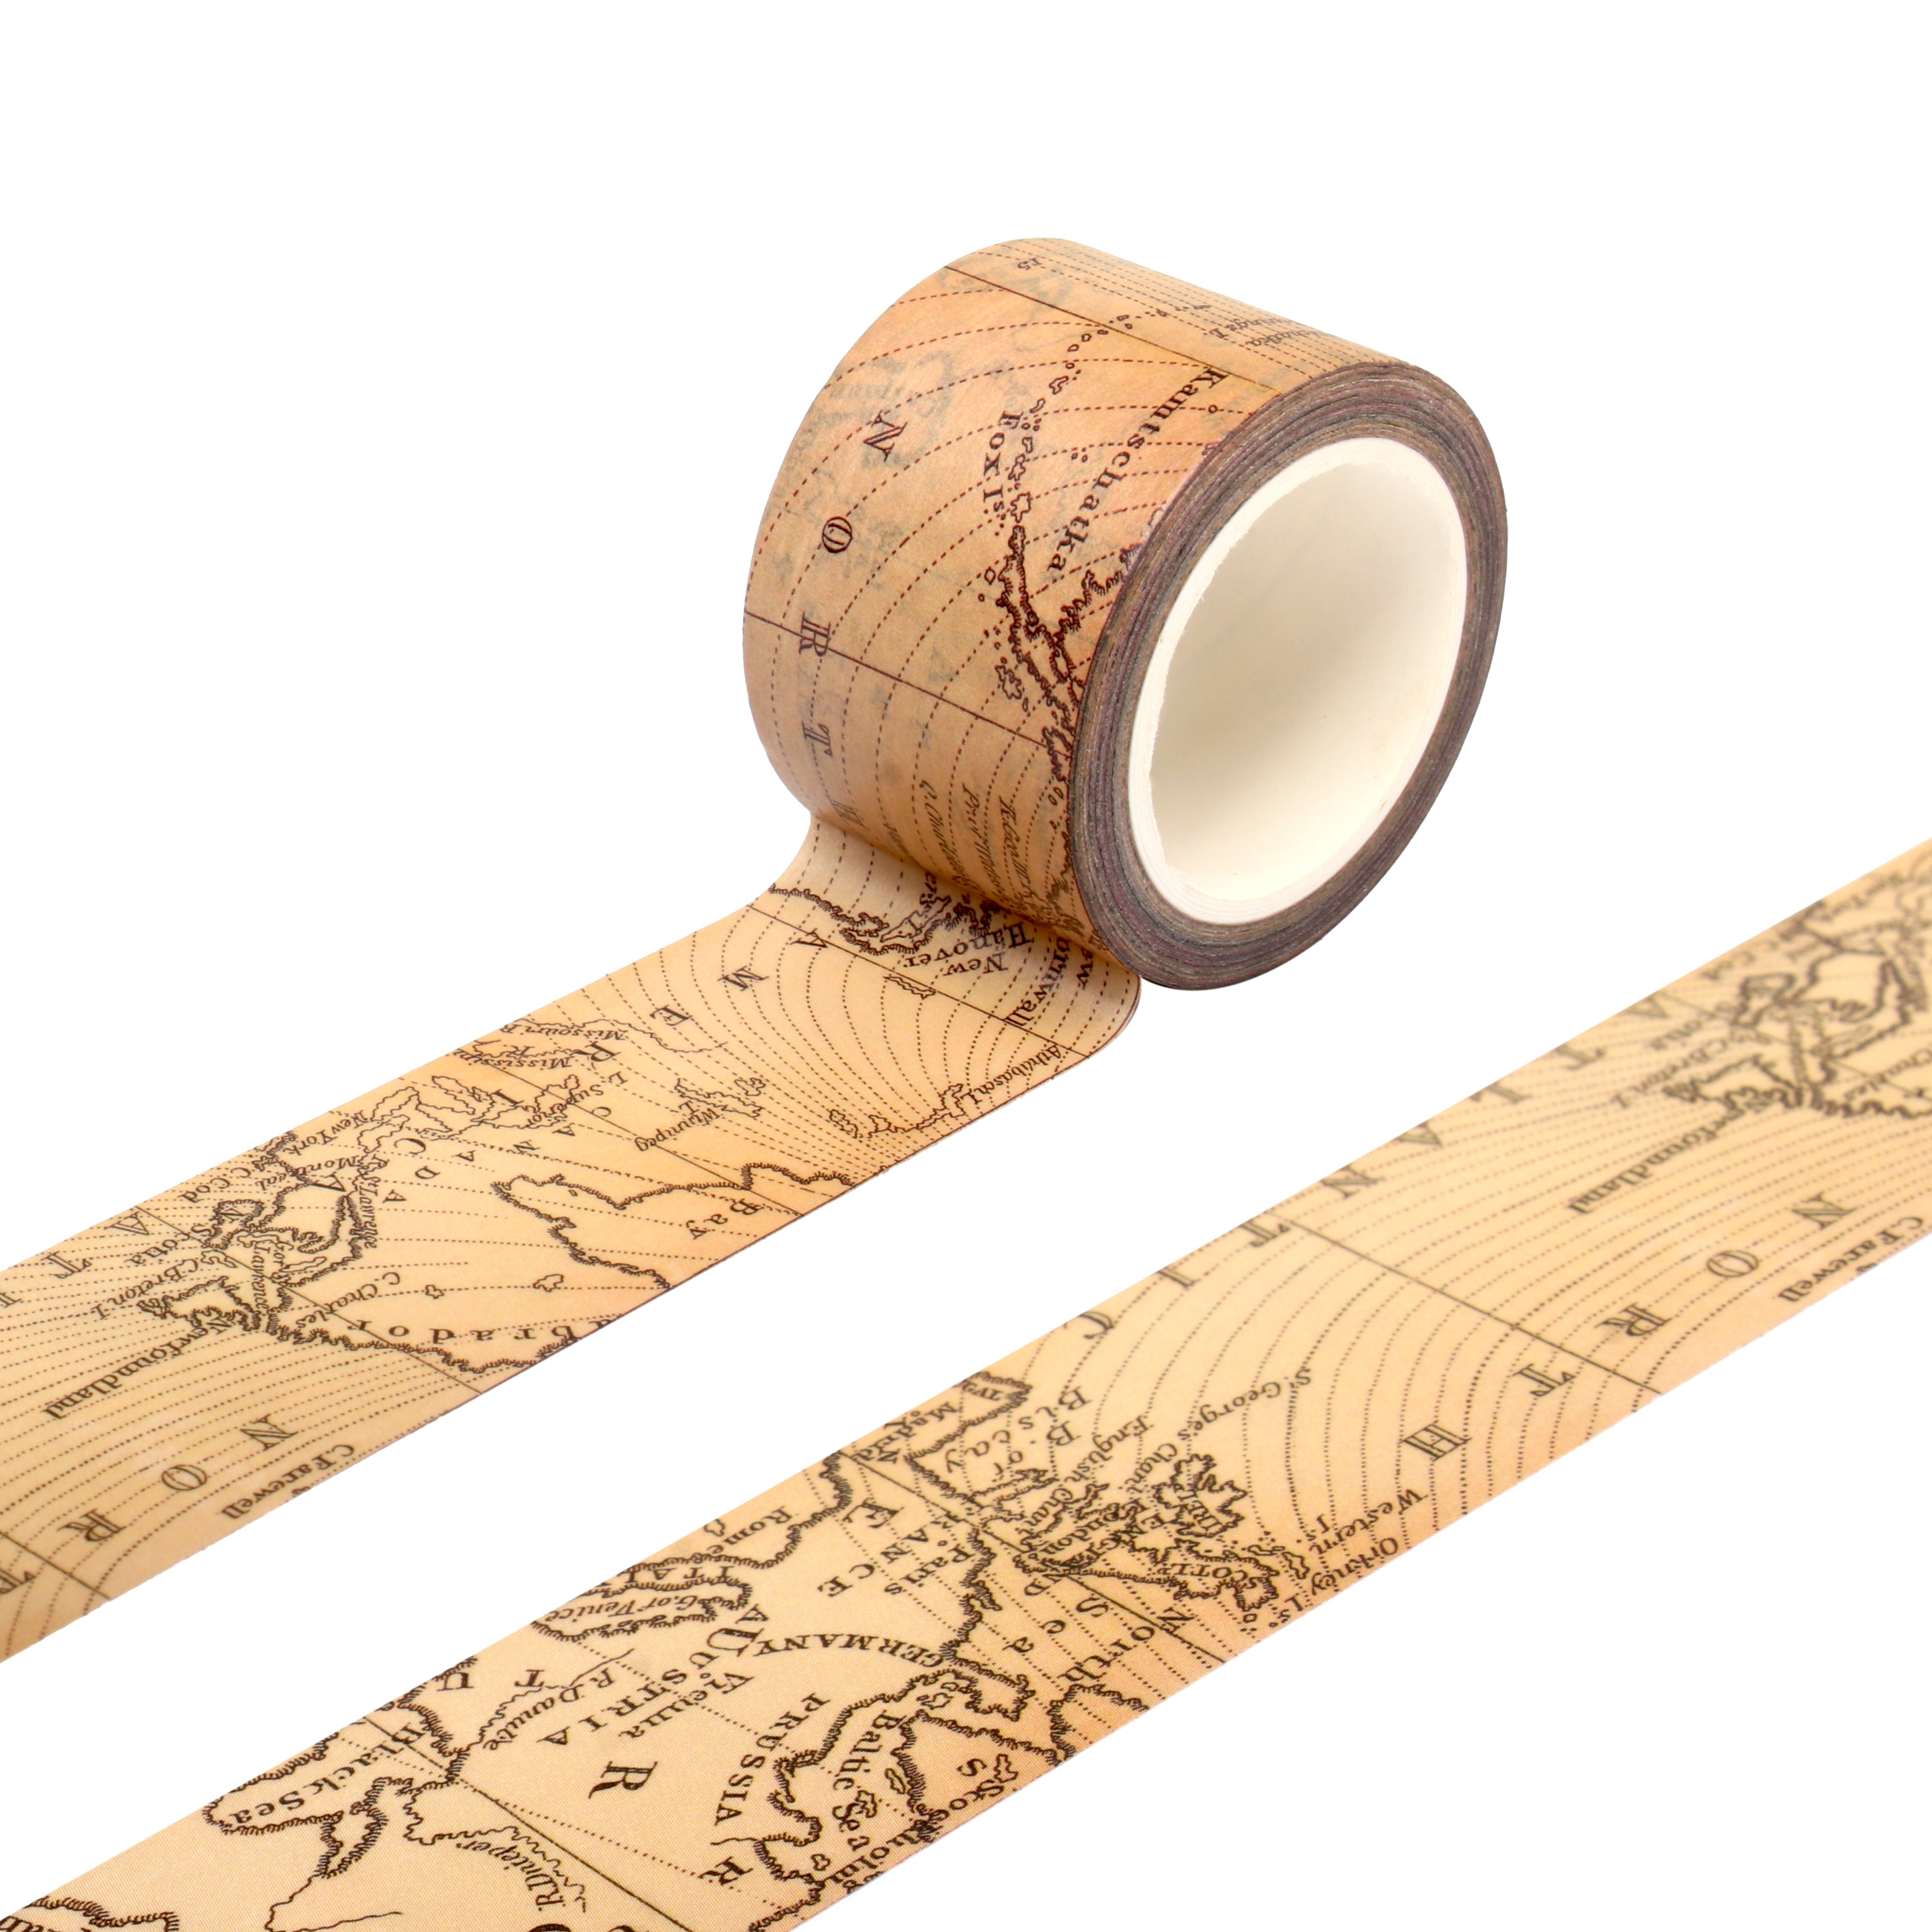 Washi Tape Vintage Map 30mmx10Mtr 1Roll